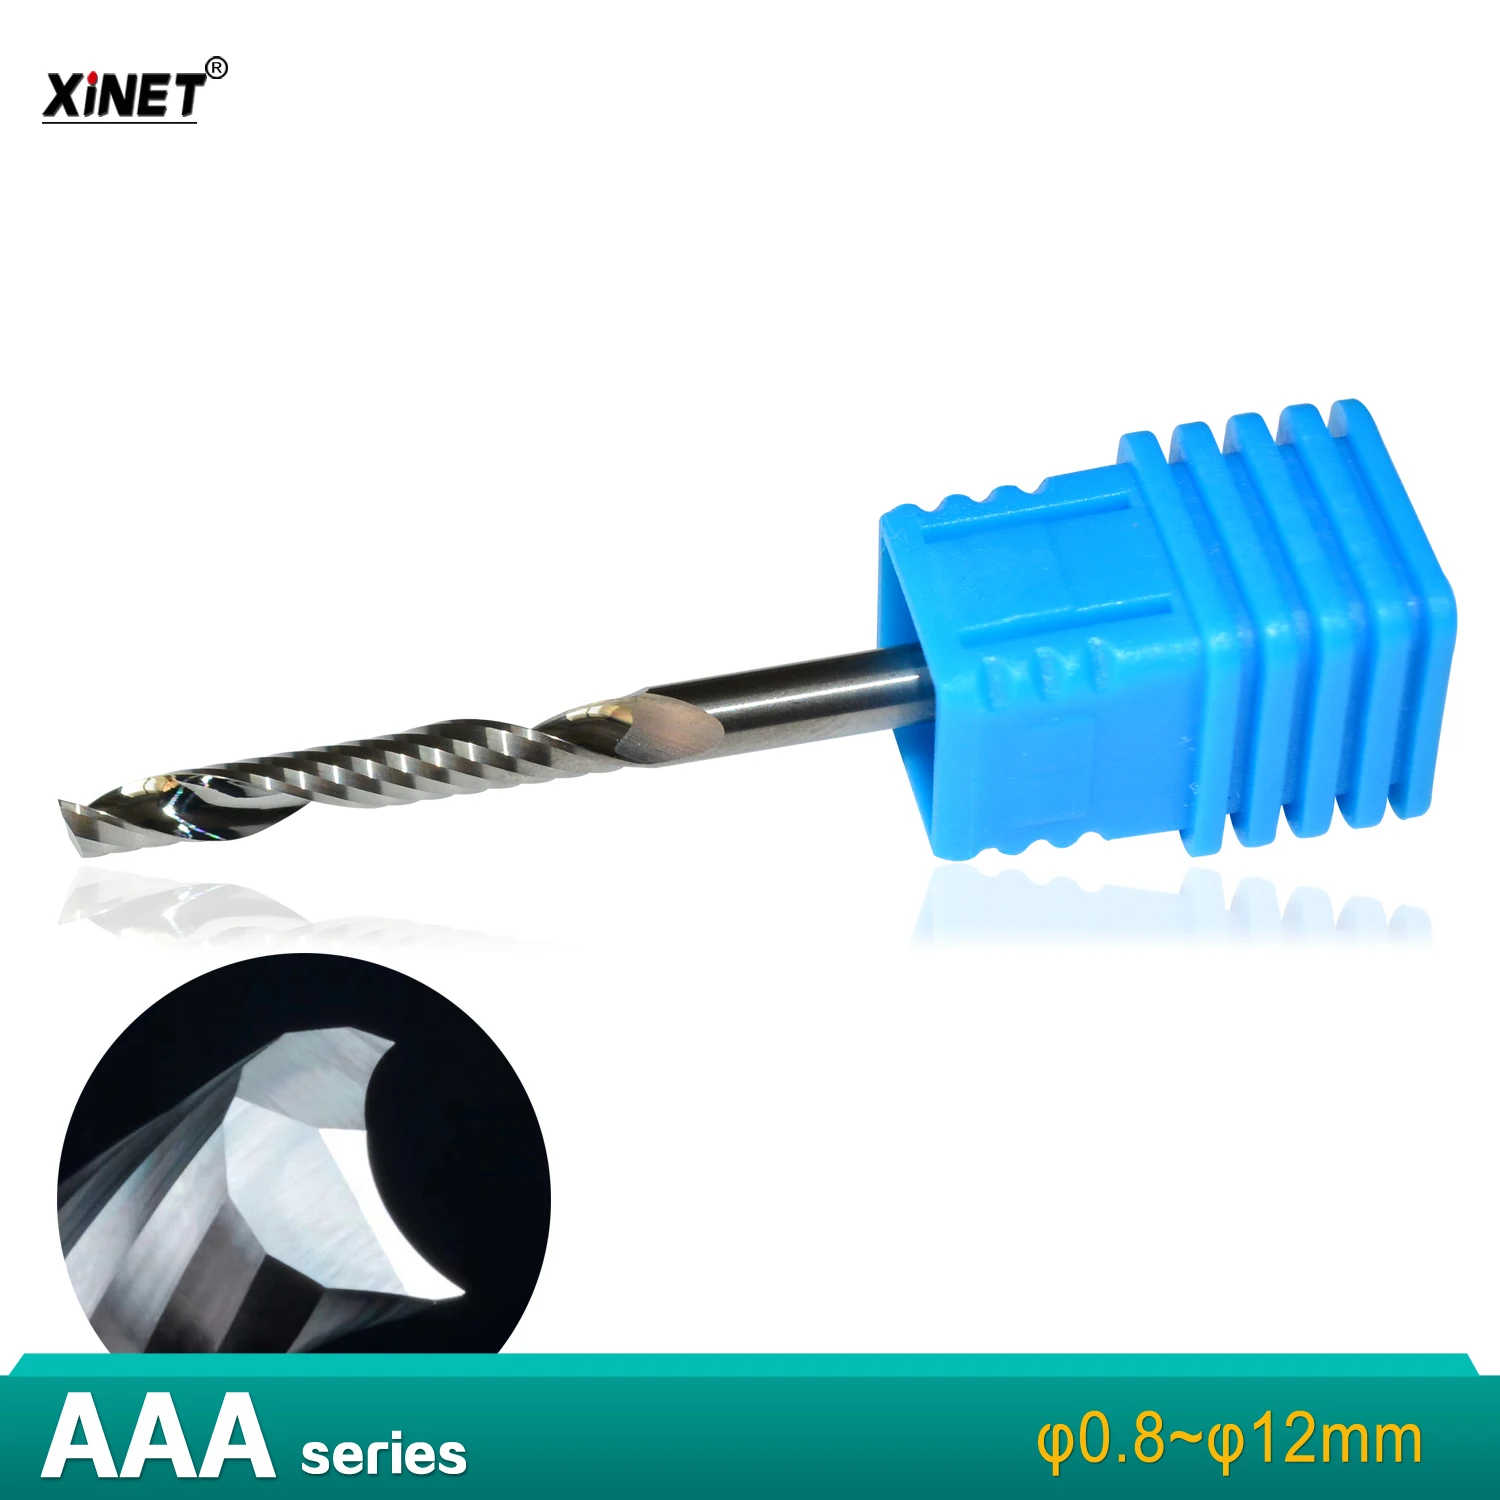 AAA Series carving Cutters One Flute Spiral Carbide End Mills Flute CNC Router Bits for cutting PVC MDF,Acrylic,Plastic hollow